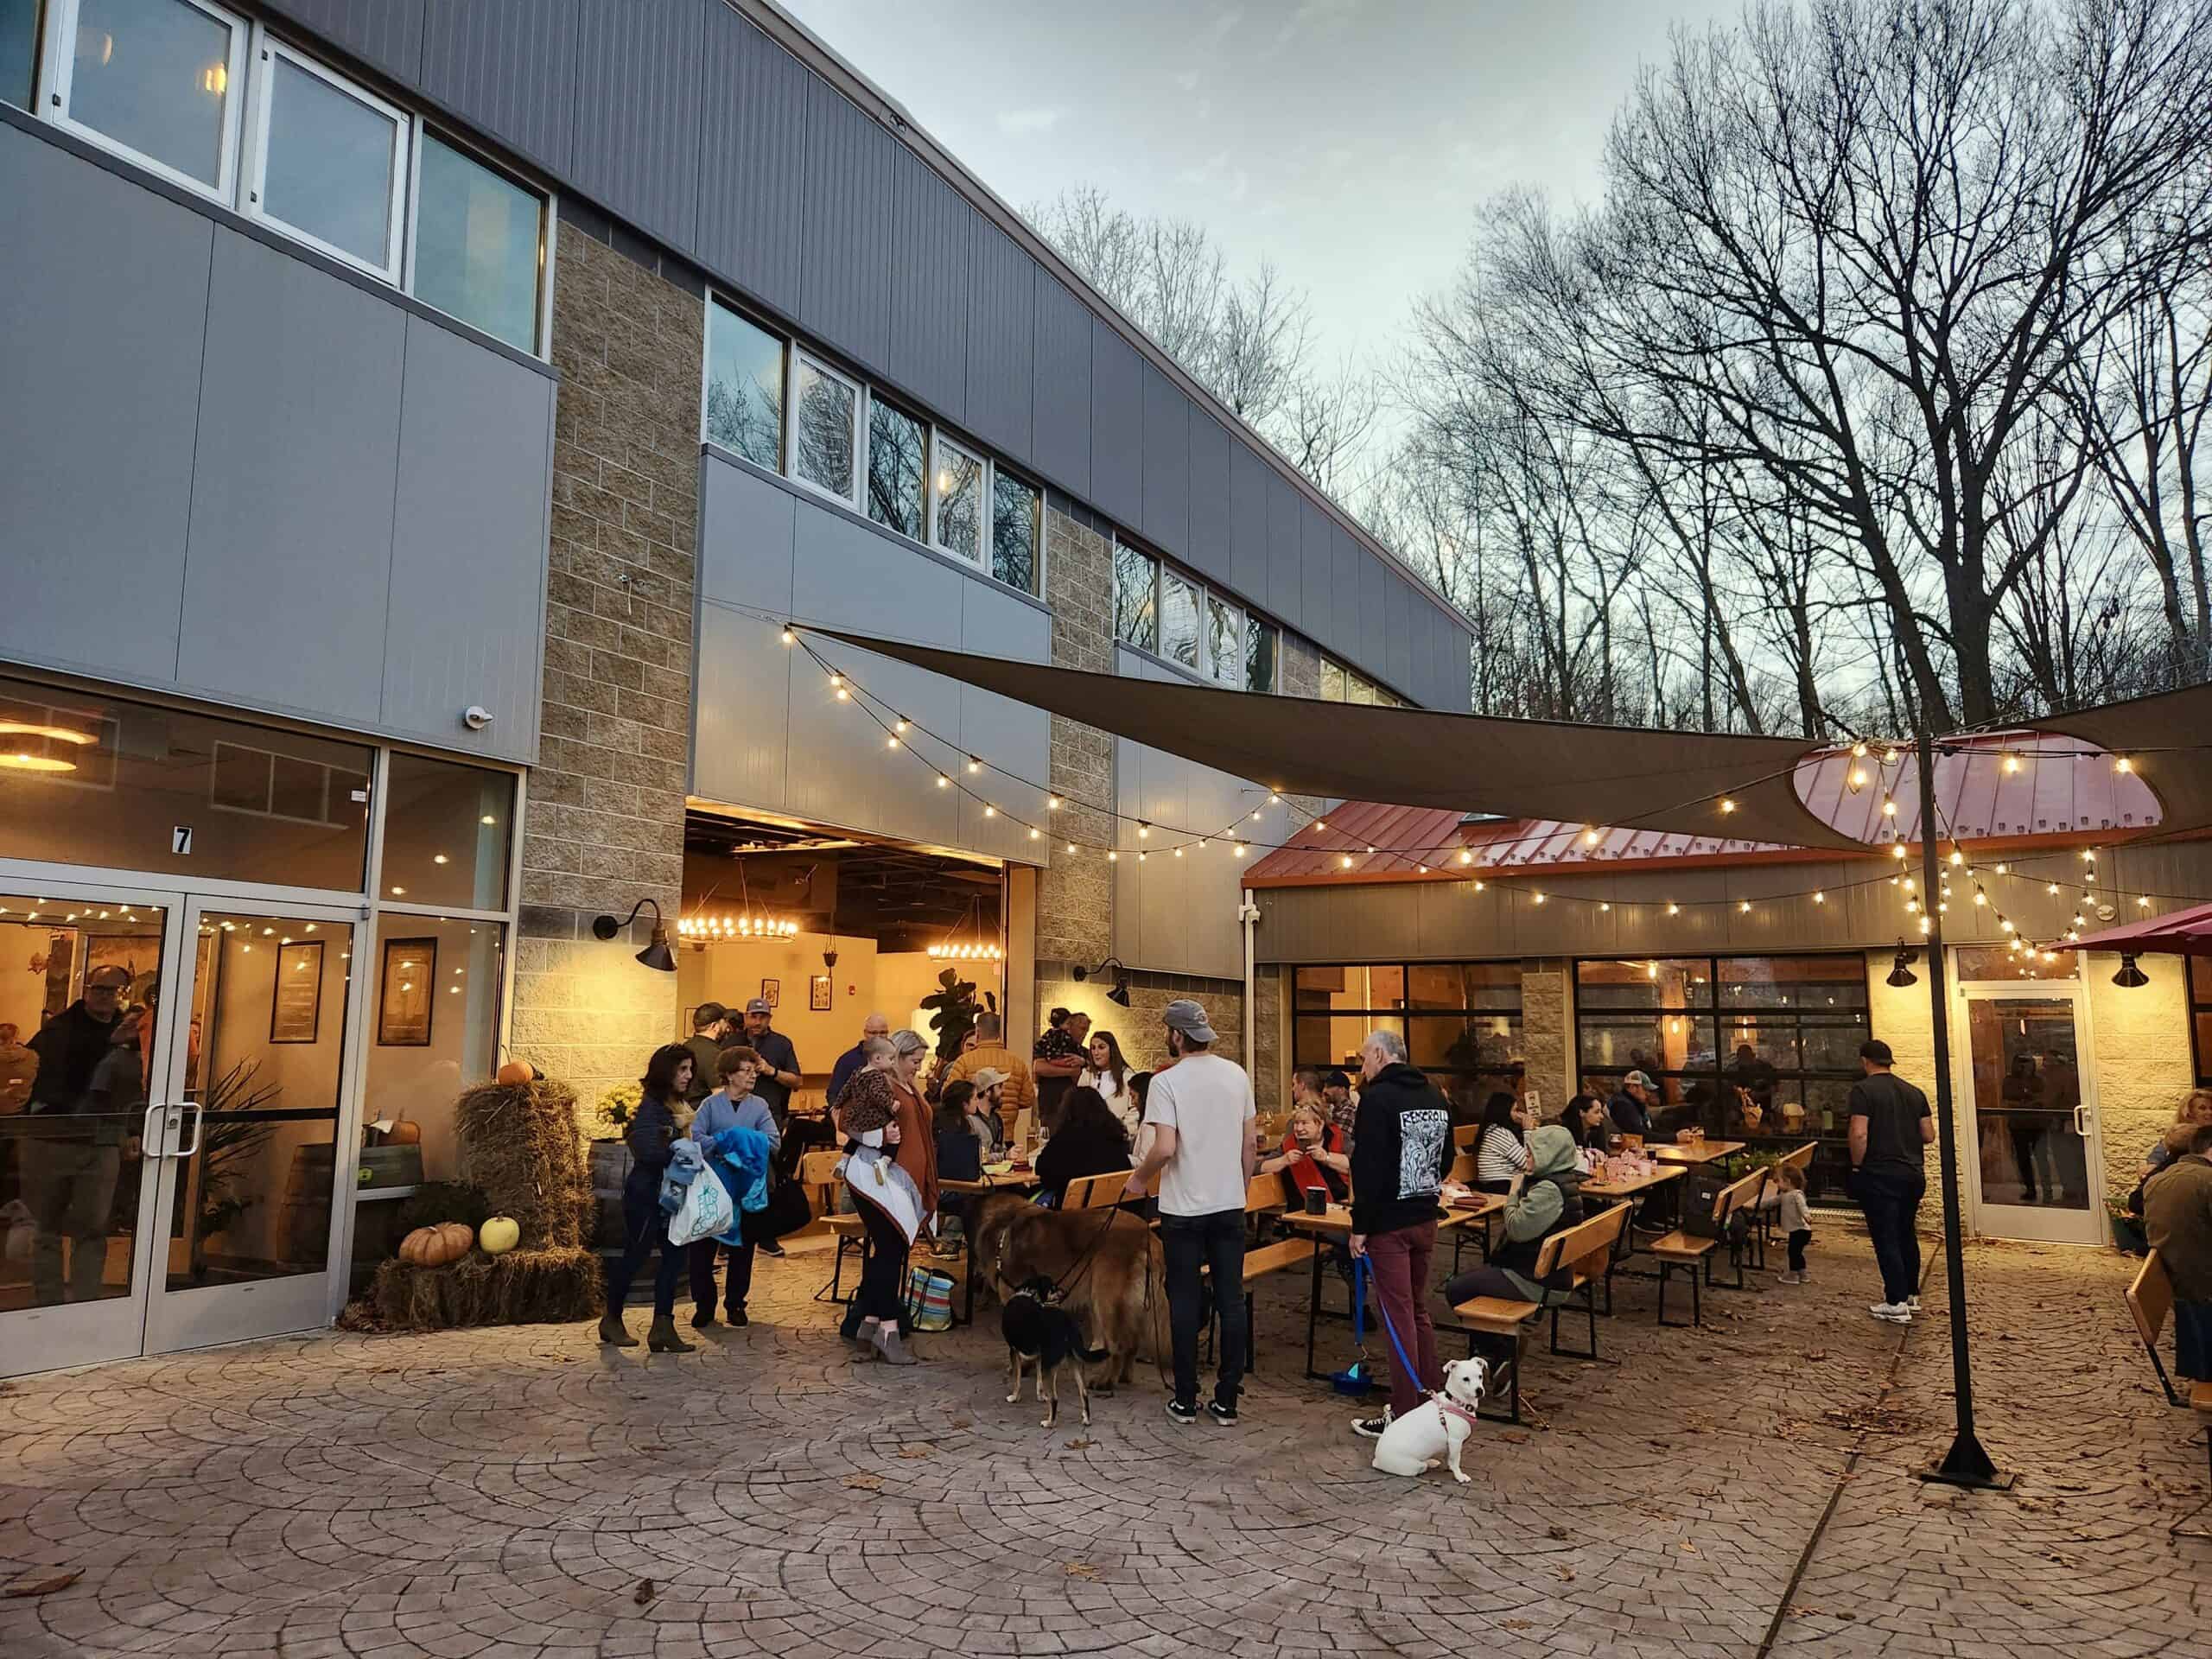 Outdoor seating with people sitting under a lit canopy at one of the most popular Connecticut breweries